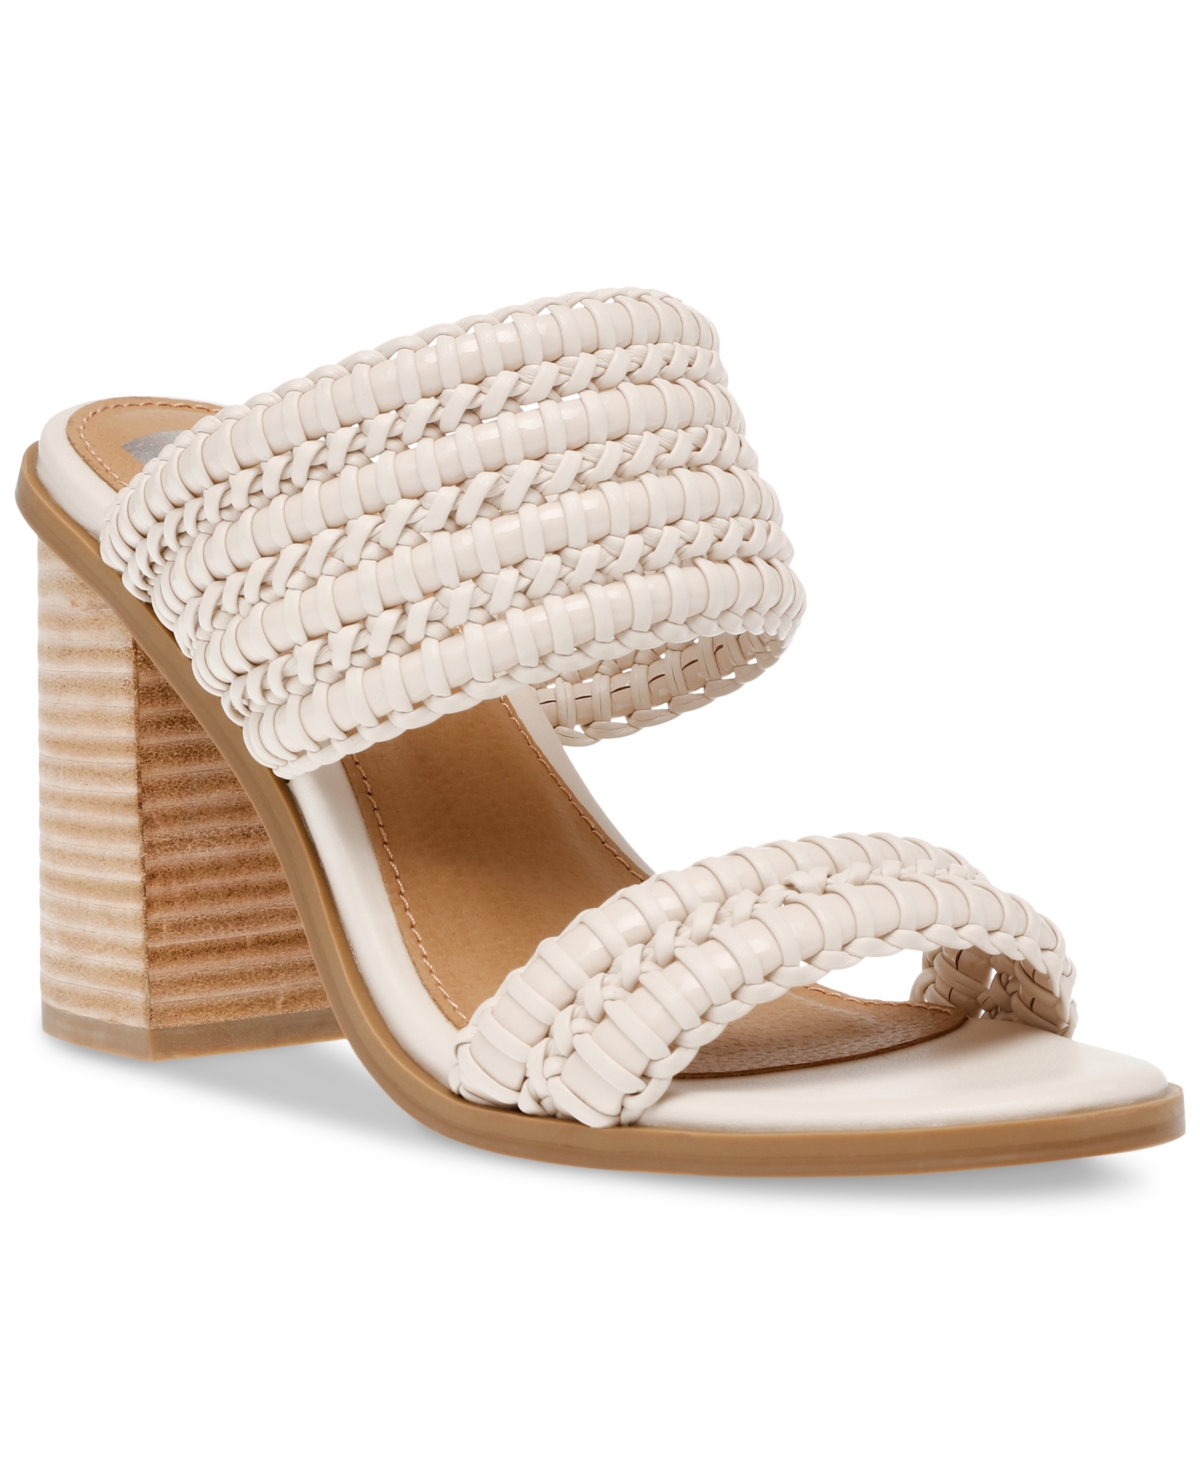 Women's Rozie Woven Strappy Dress Sandals - Ivory